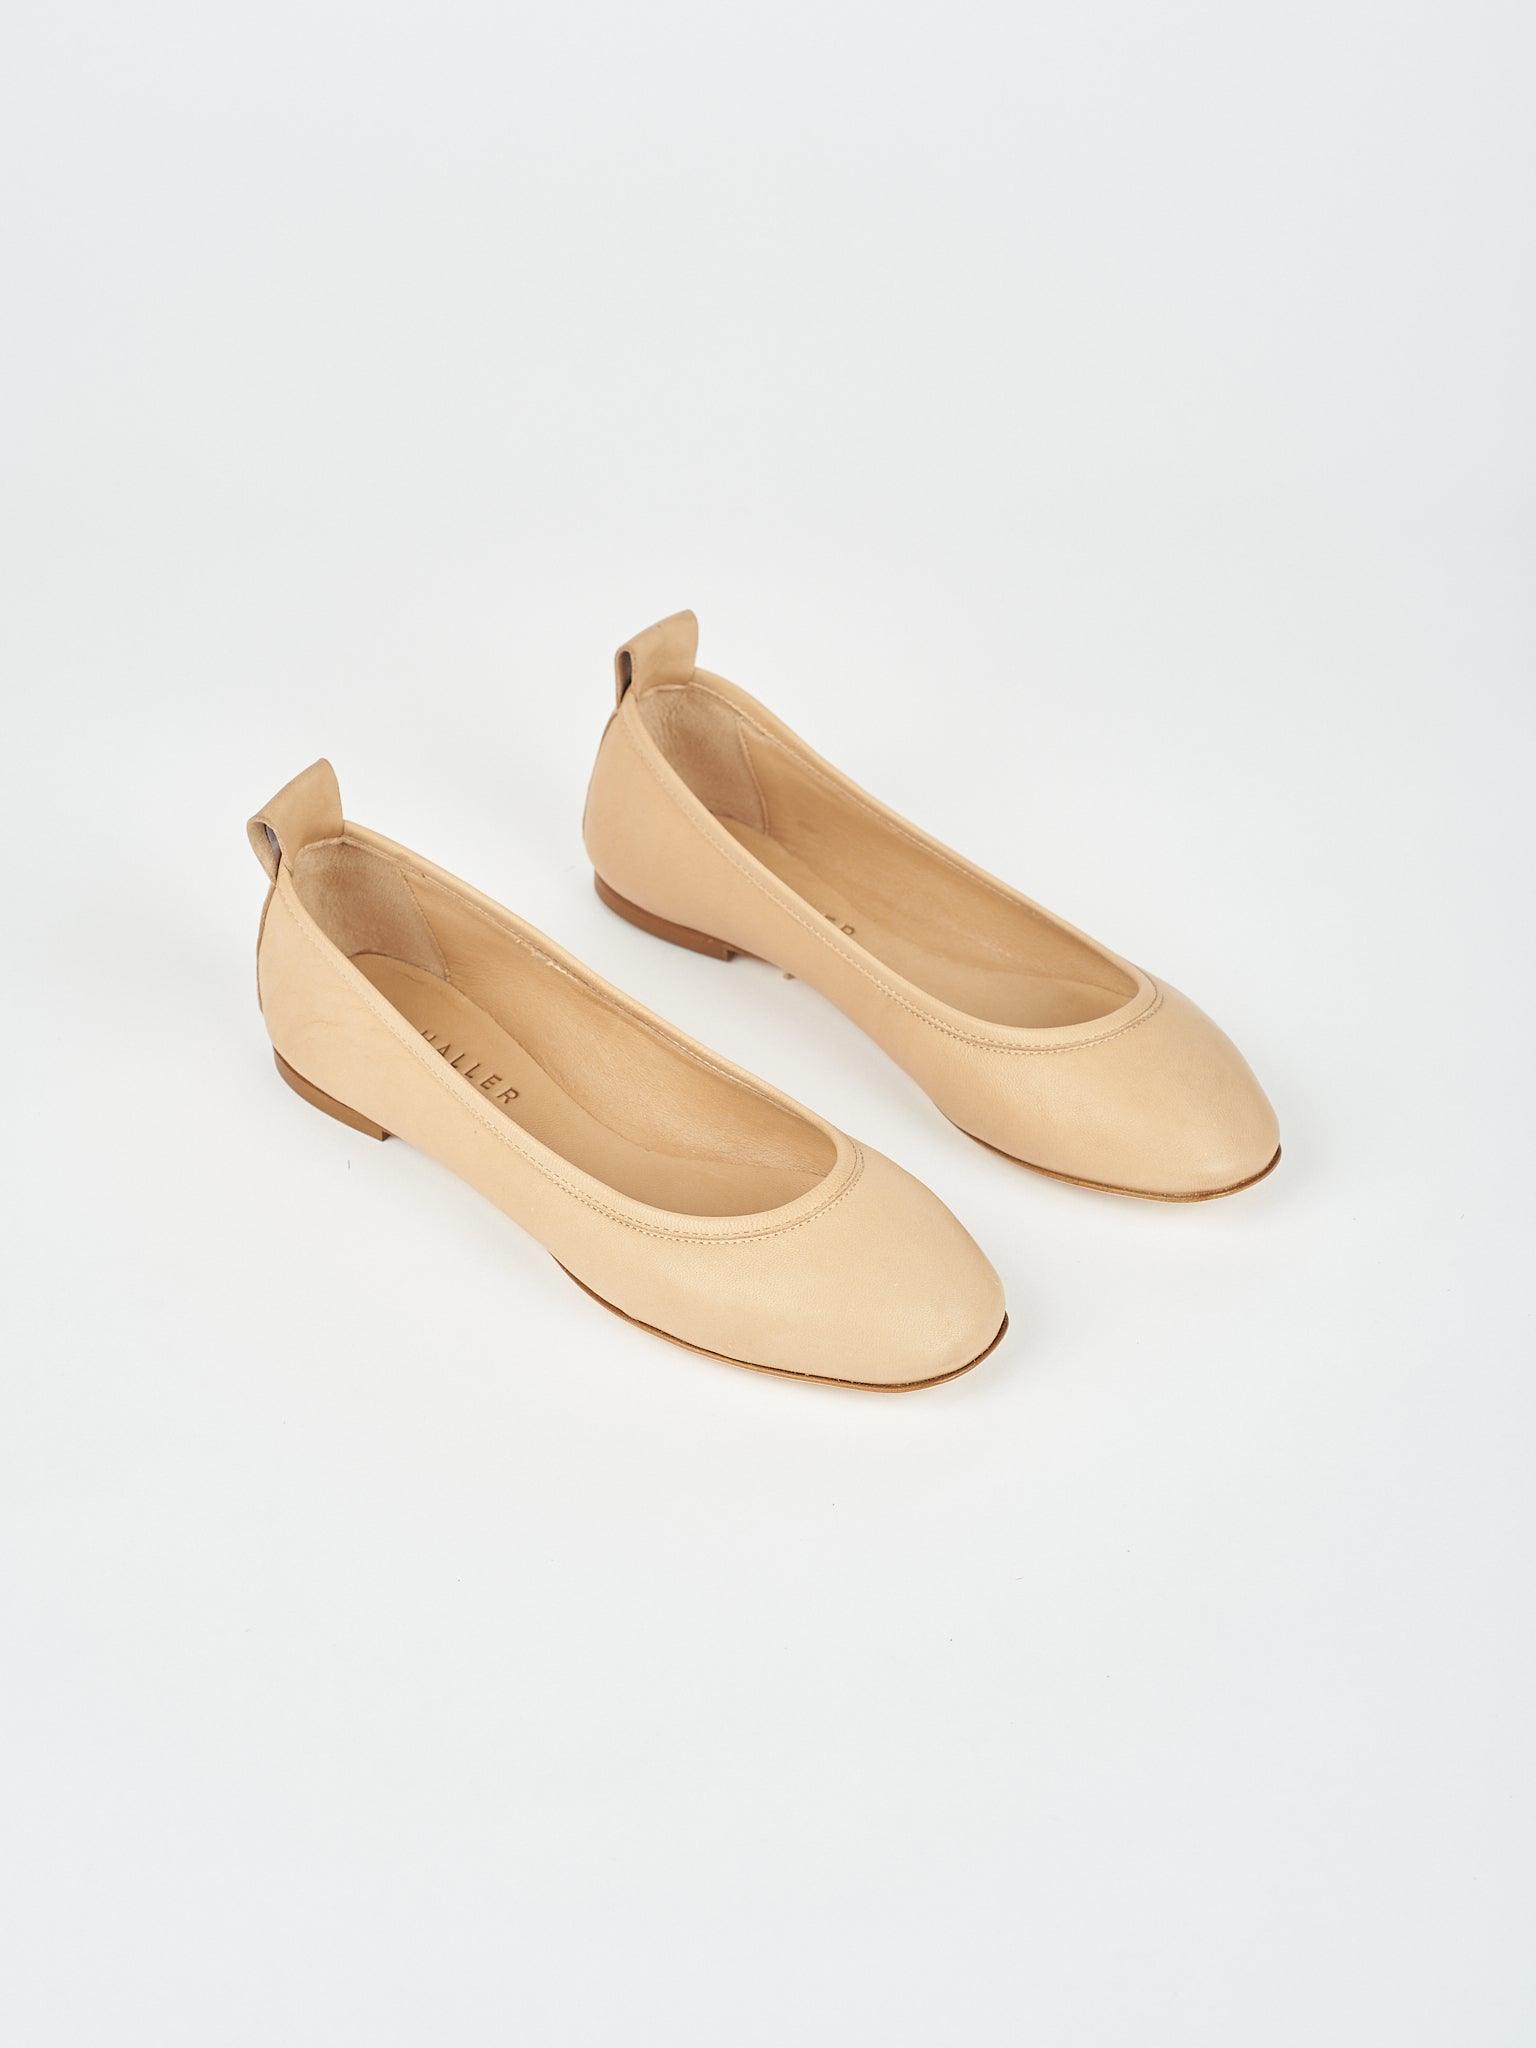 The Point Ballet in Soft Tan Angled Front View